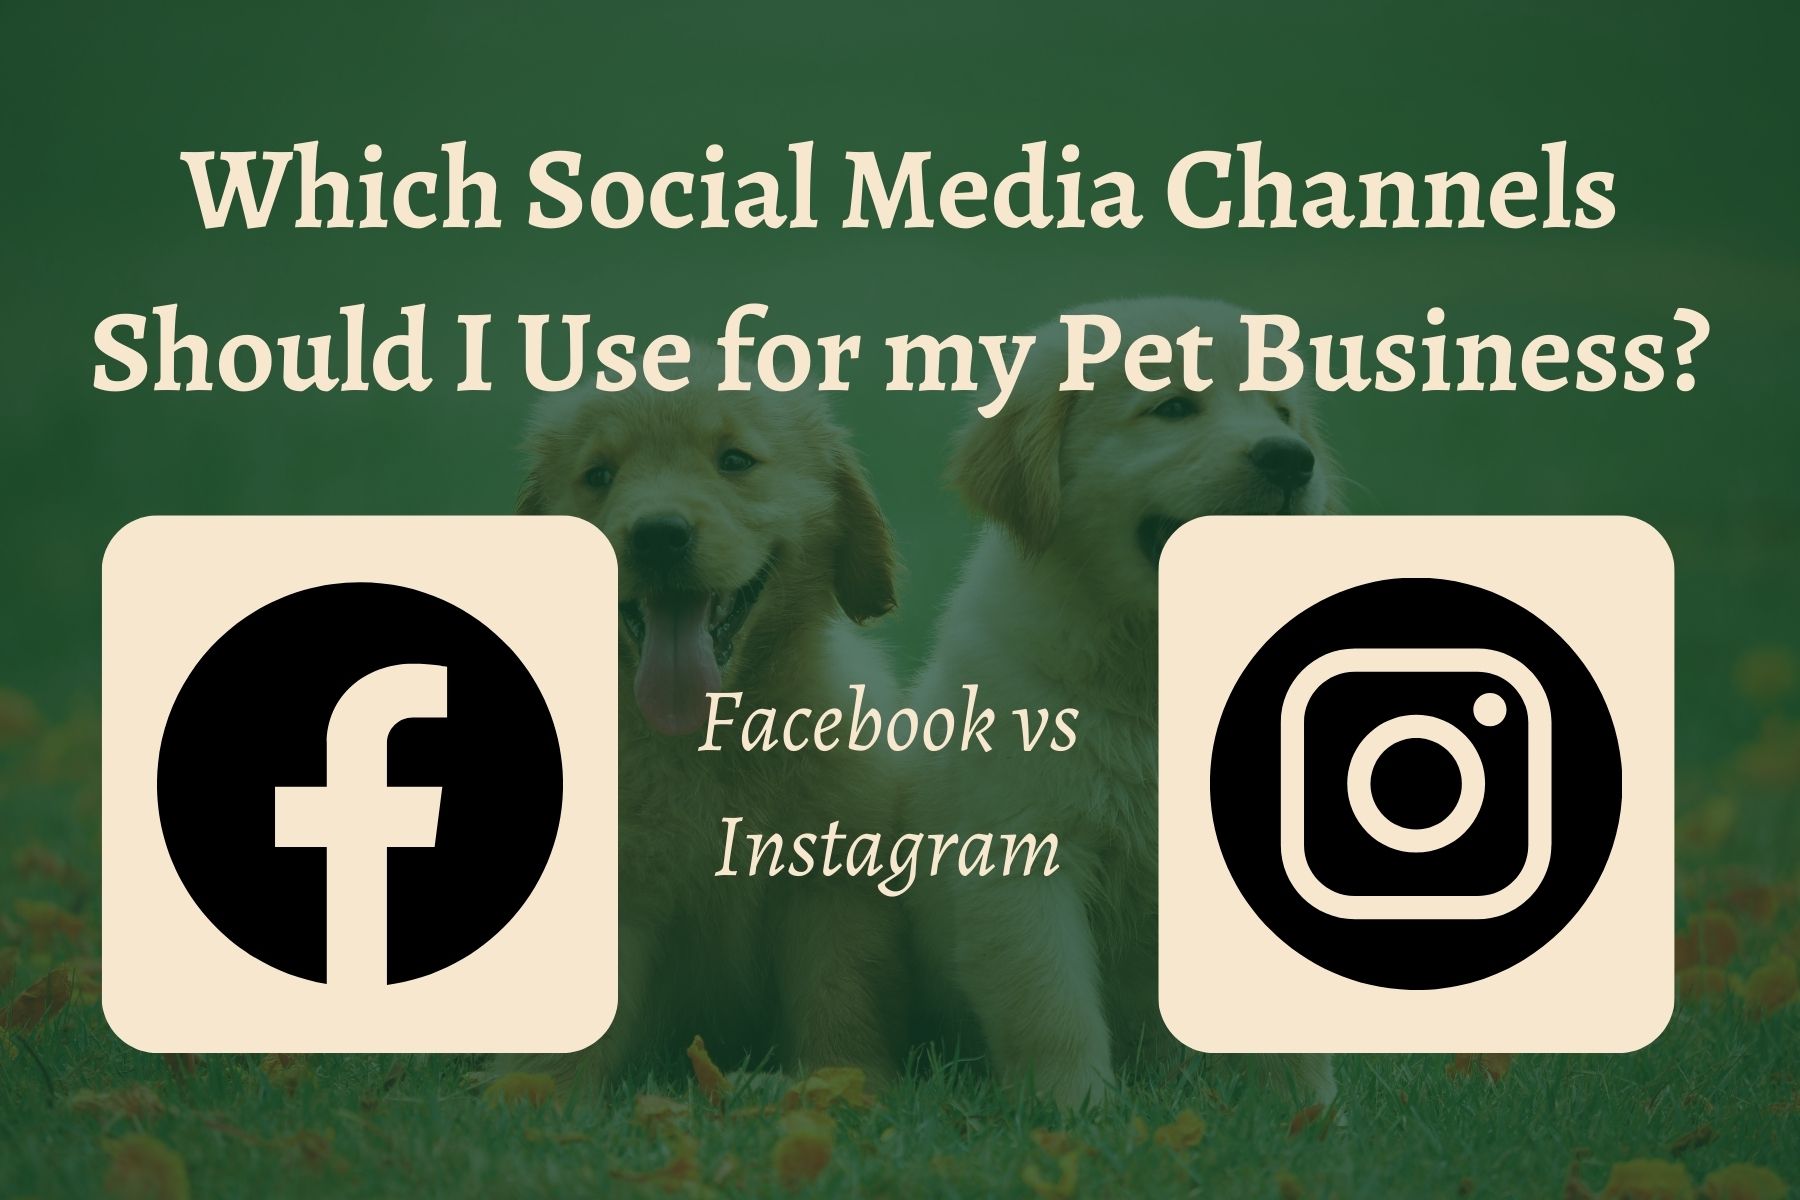 Facebook vs Insta – which social channel does my pet care business need?